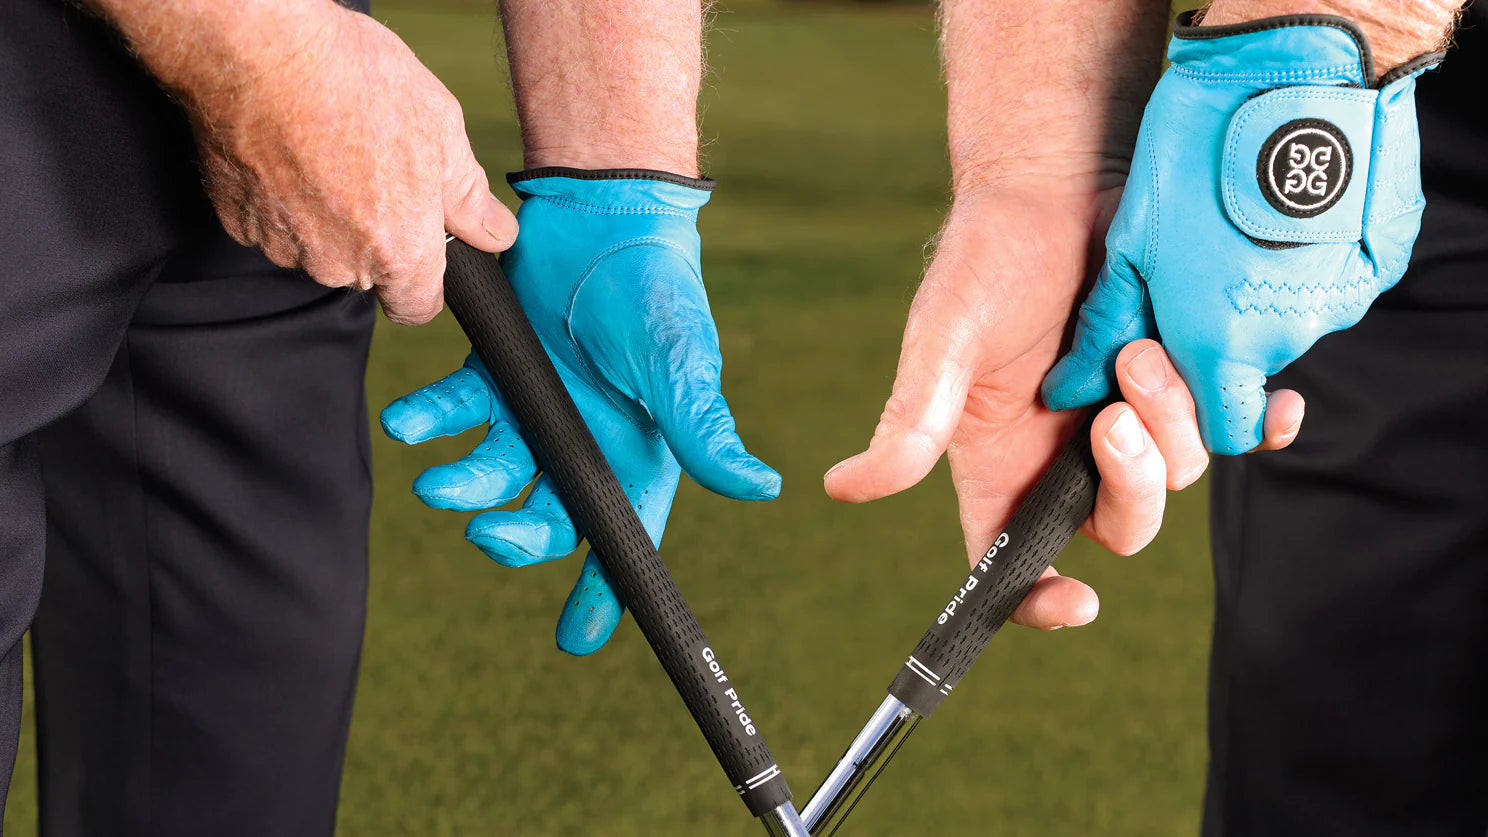 write a blog about The Importance of a Good Grip on the Club